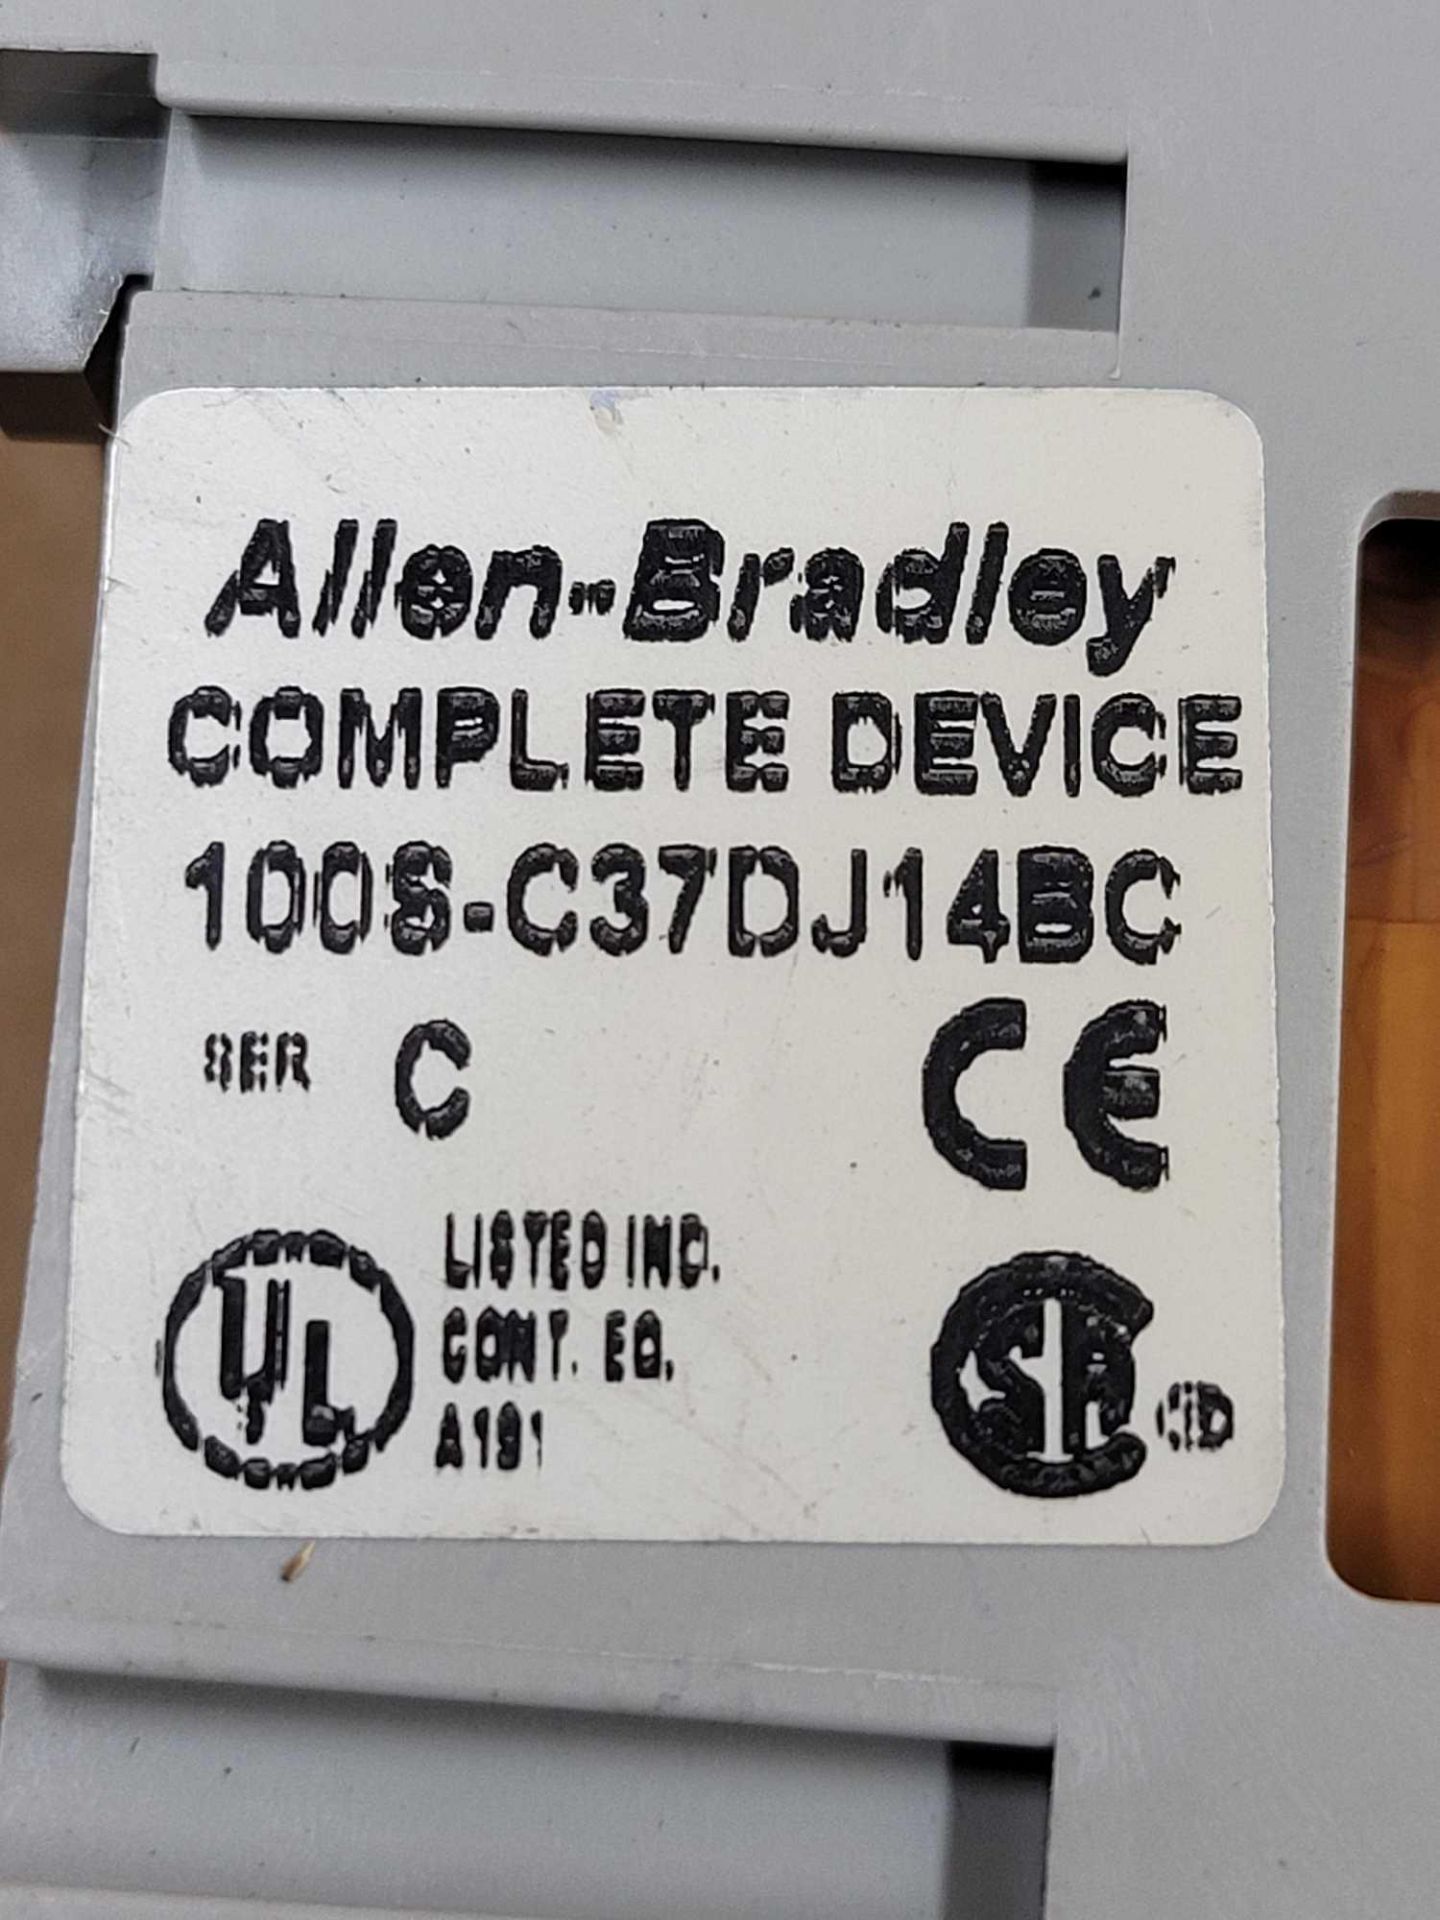 LOT OF 5 ALLEN BRADLEY 100S-C37DJ14BC / Guardmaster Safety Contactor  /  Lot Weight: 10.6 lbs - Image 10 of 12